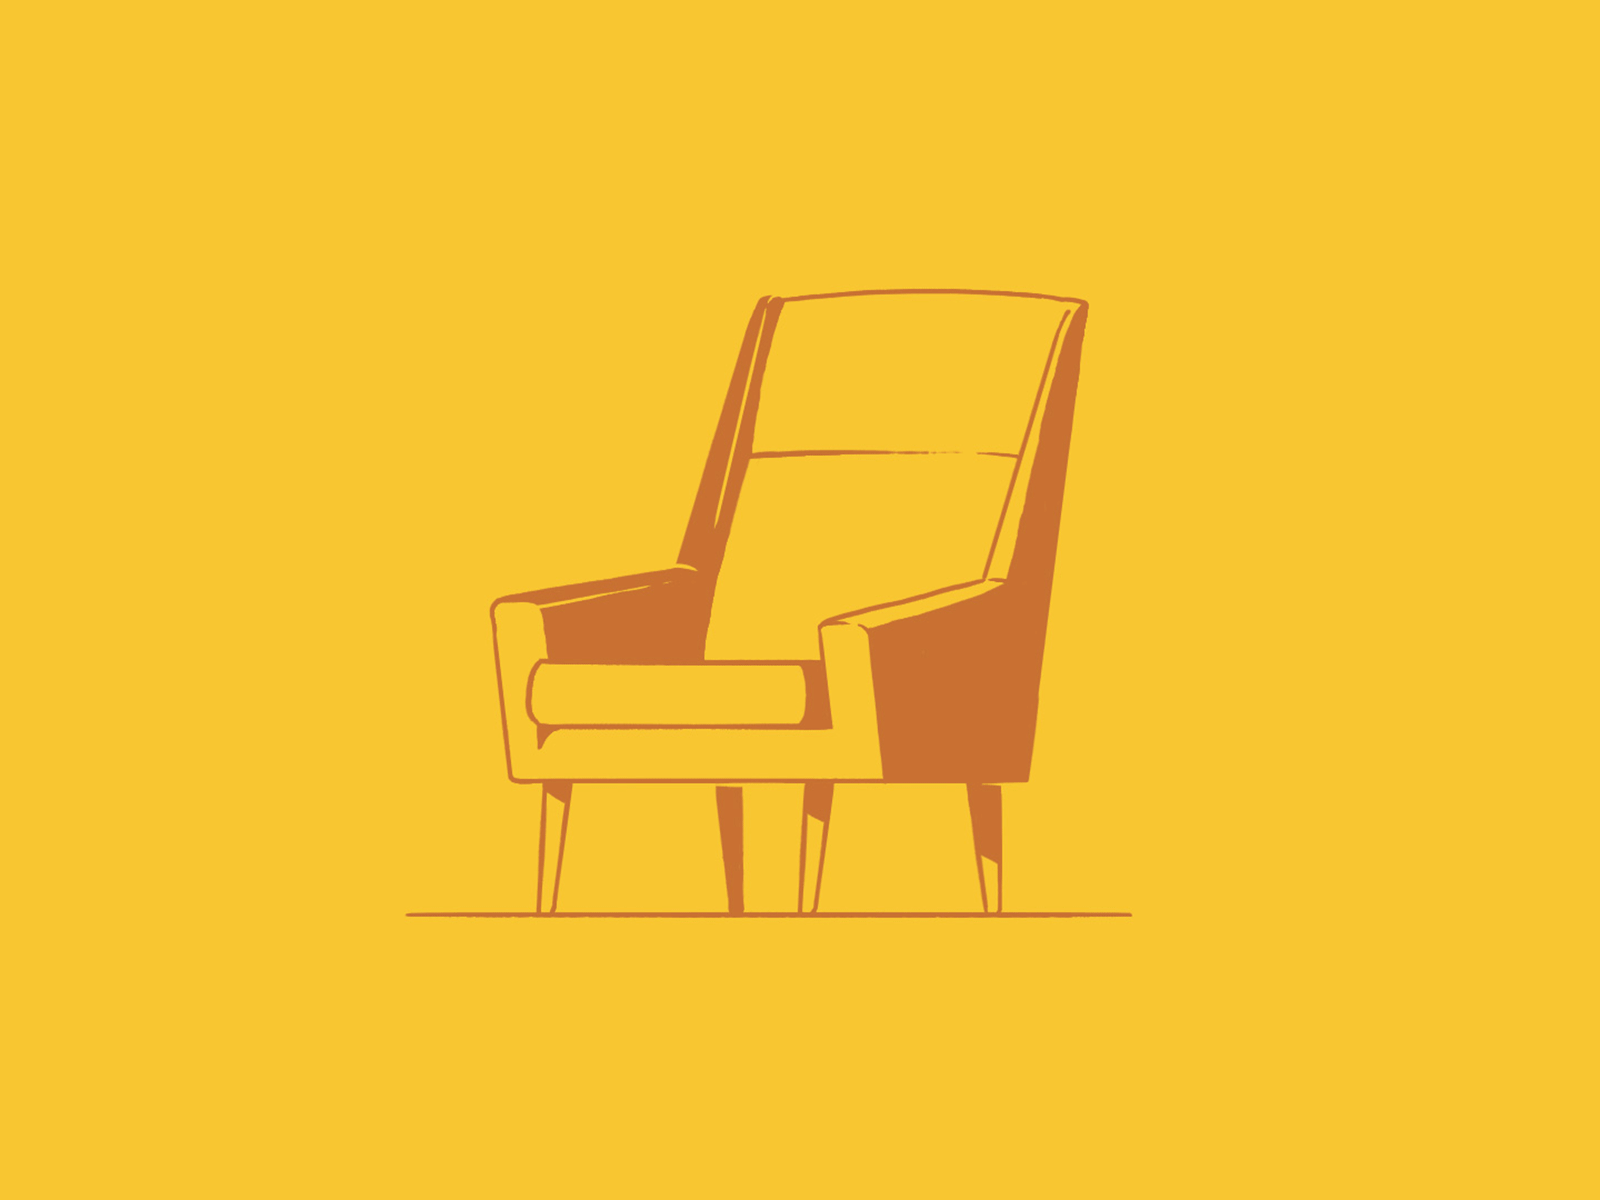 Have a seat! chairs furniture home illustration mid century modern scandinavian